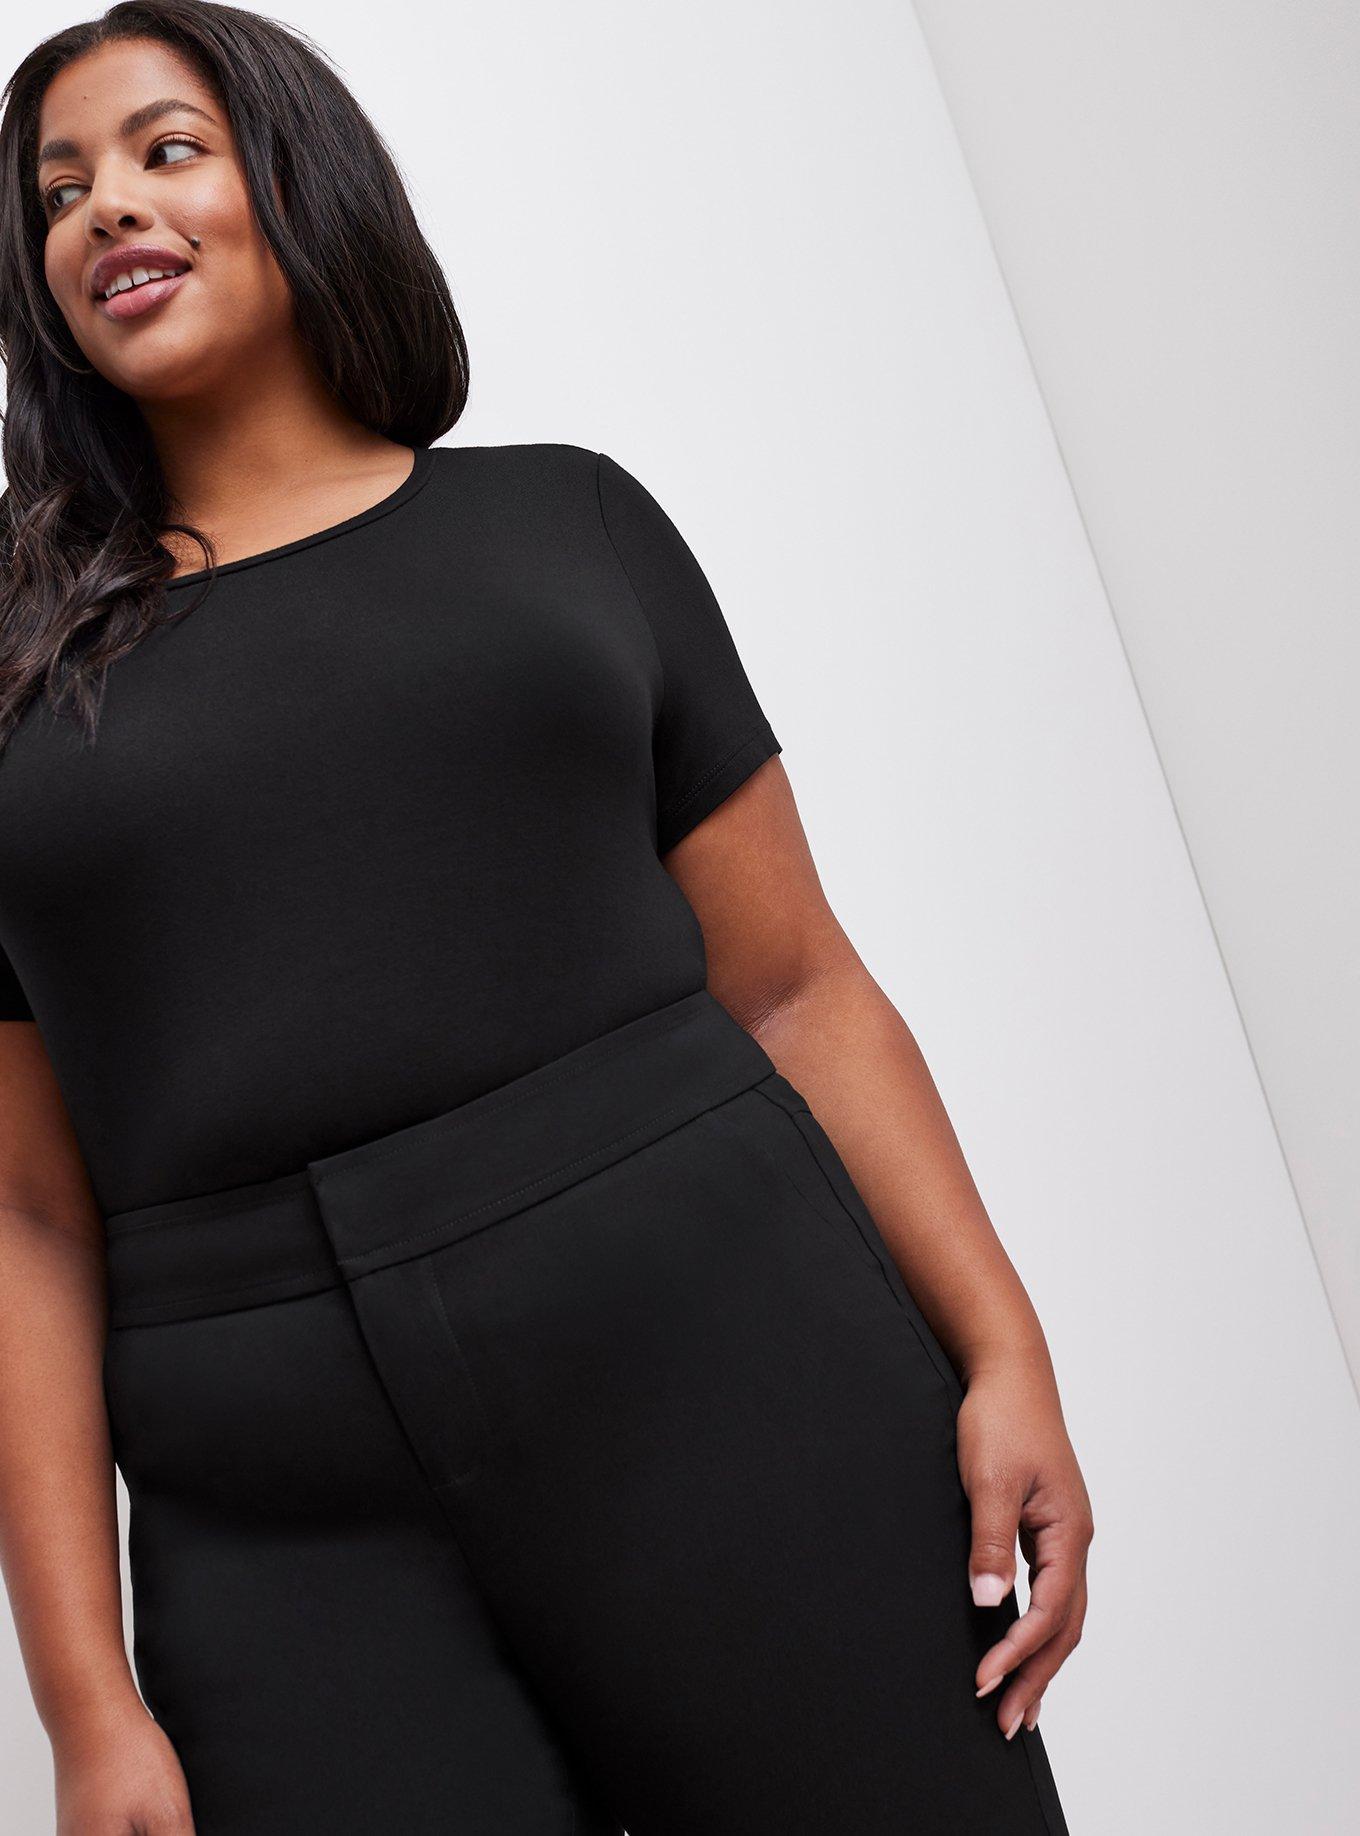 Torrid Plus Size Clothing Direct to Consumer